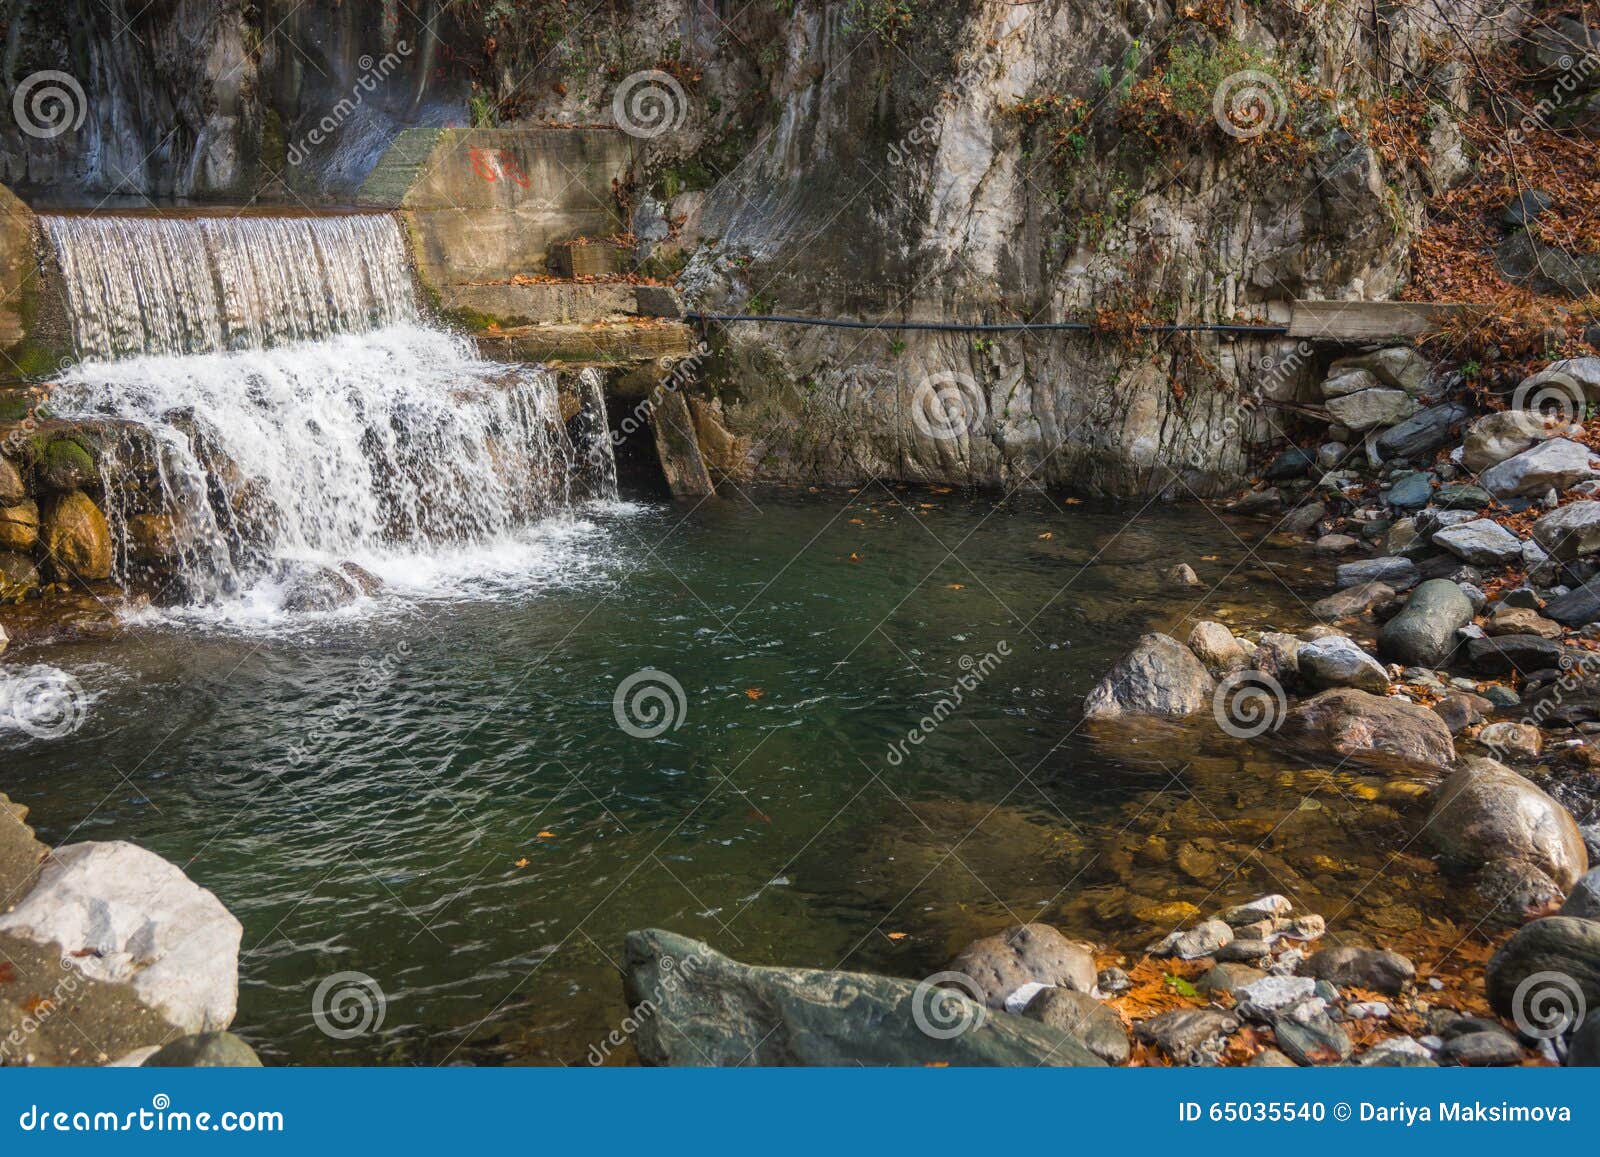 river with colored stones and hot springs in loutra pozar, north